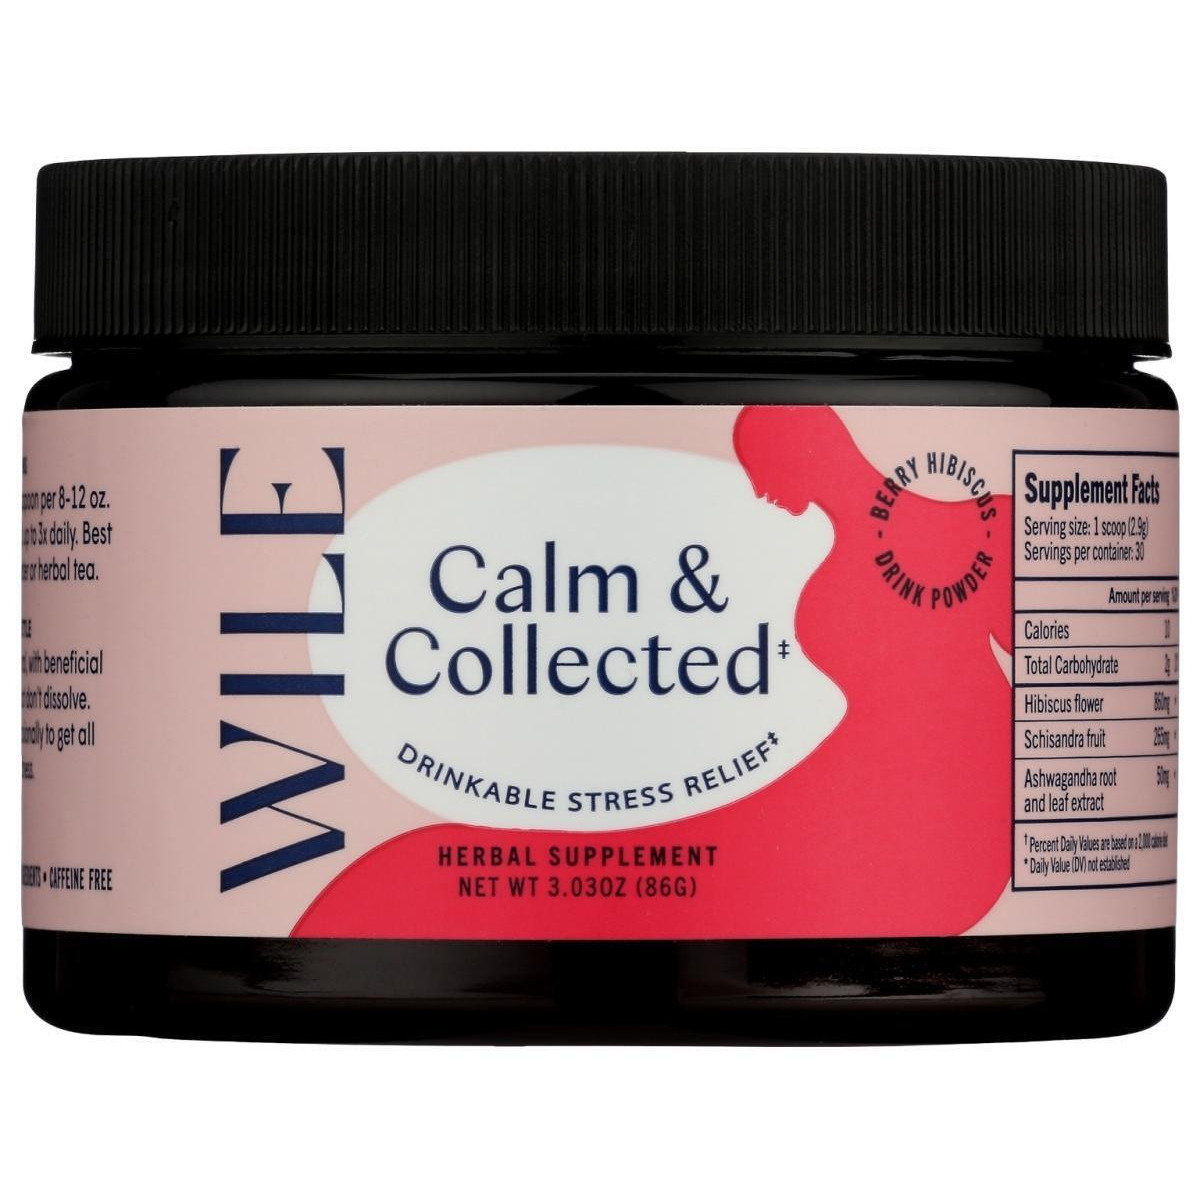 Wile KHCH02209424 3.03 oz Calm & Collected Drink Mix